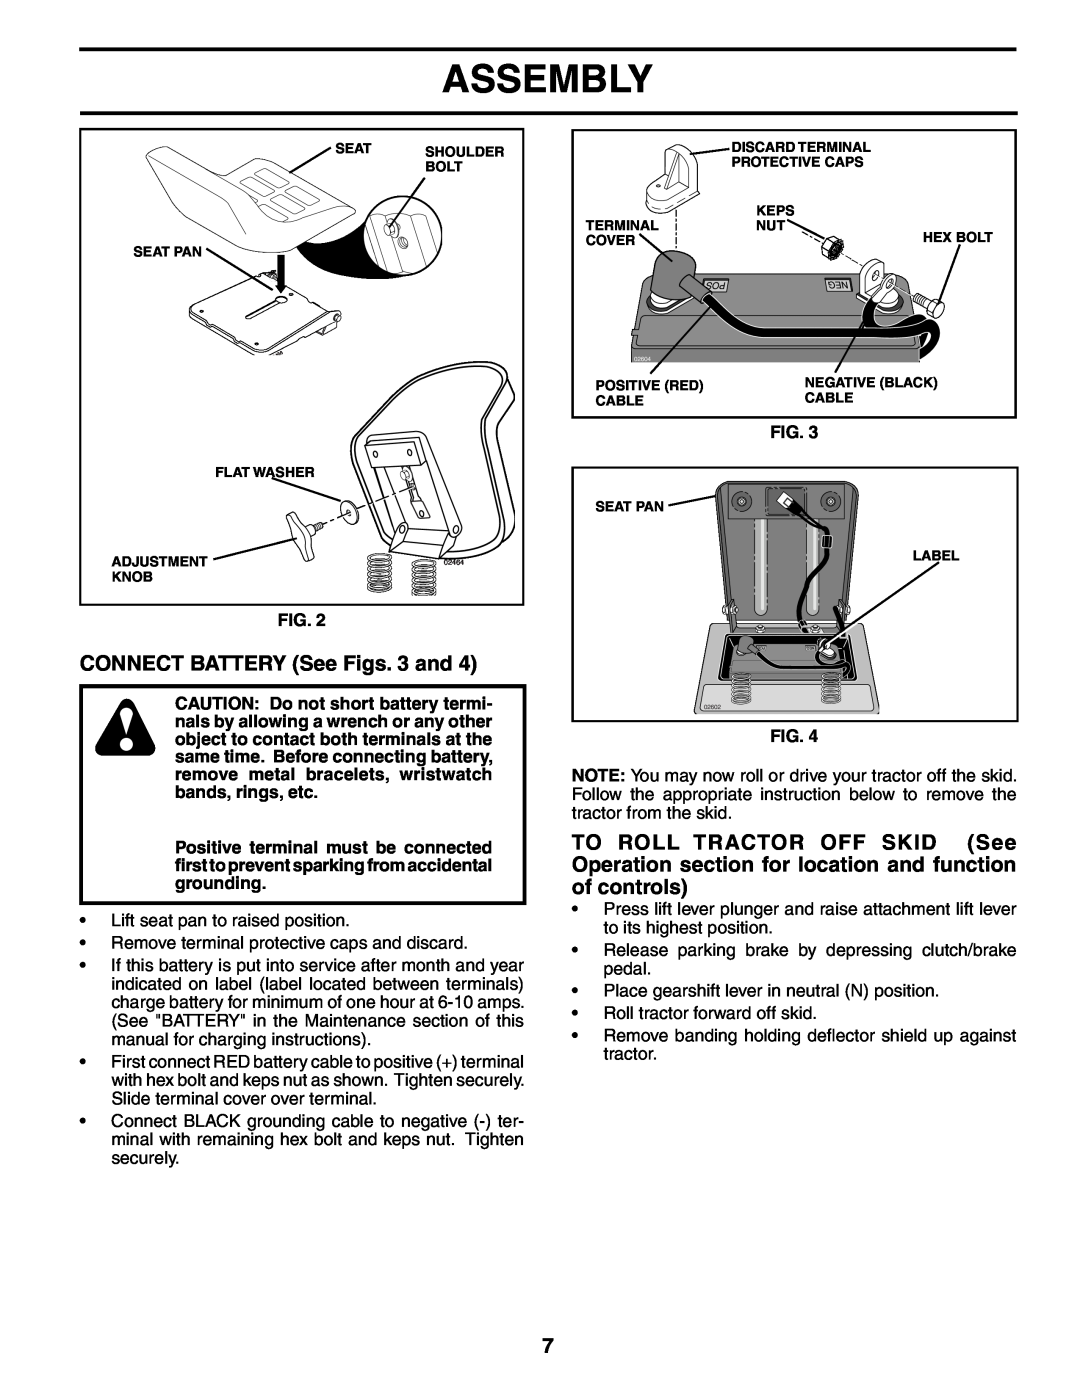 Husqvarna LT1536 owner manual CONNECT BATTERY See Figs. 3 and, Assembly 